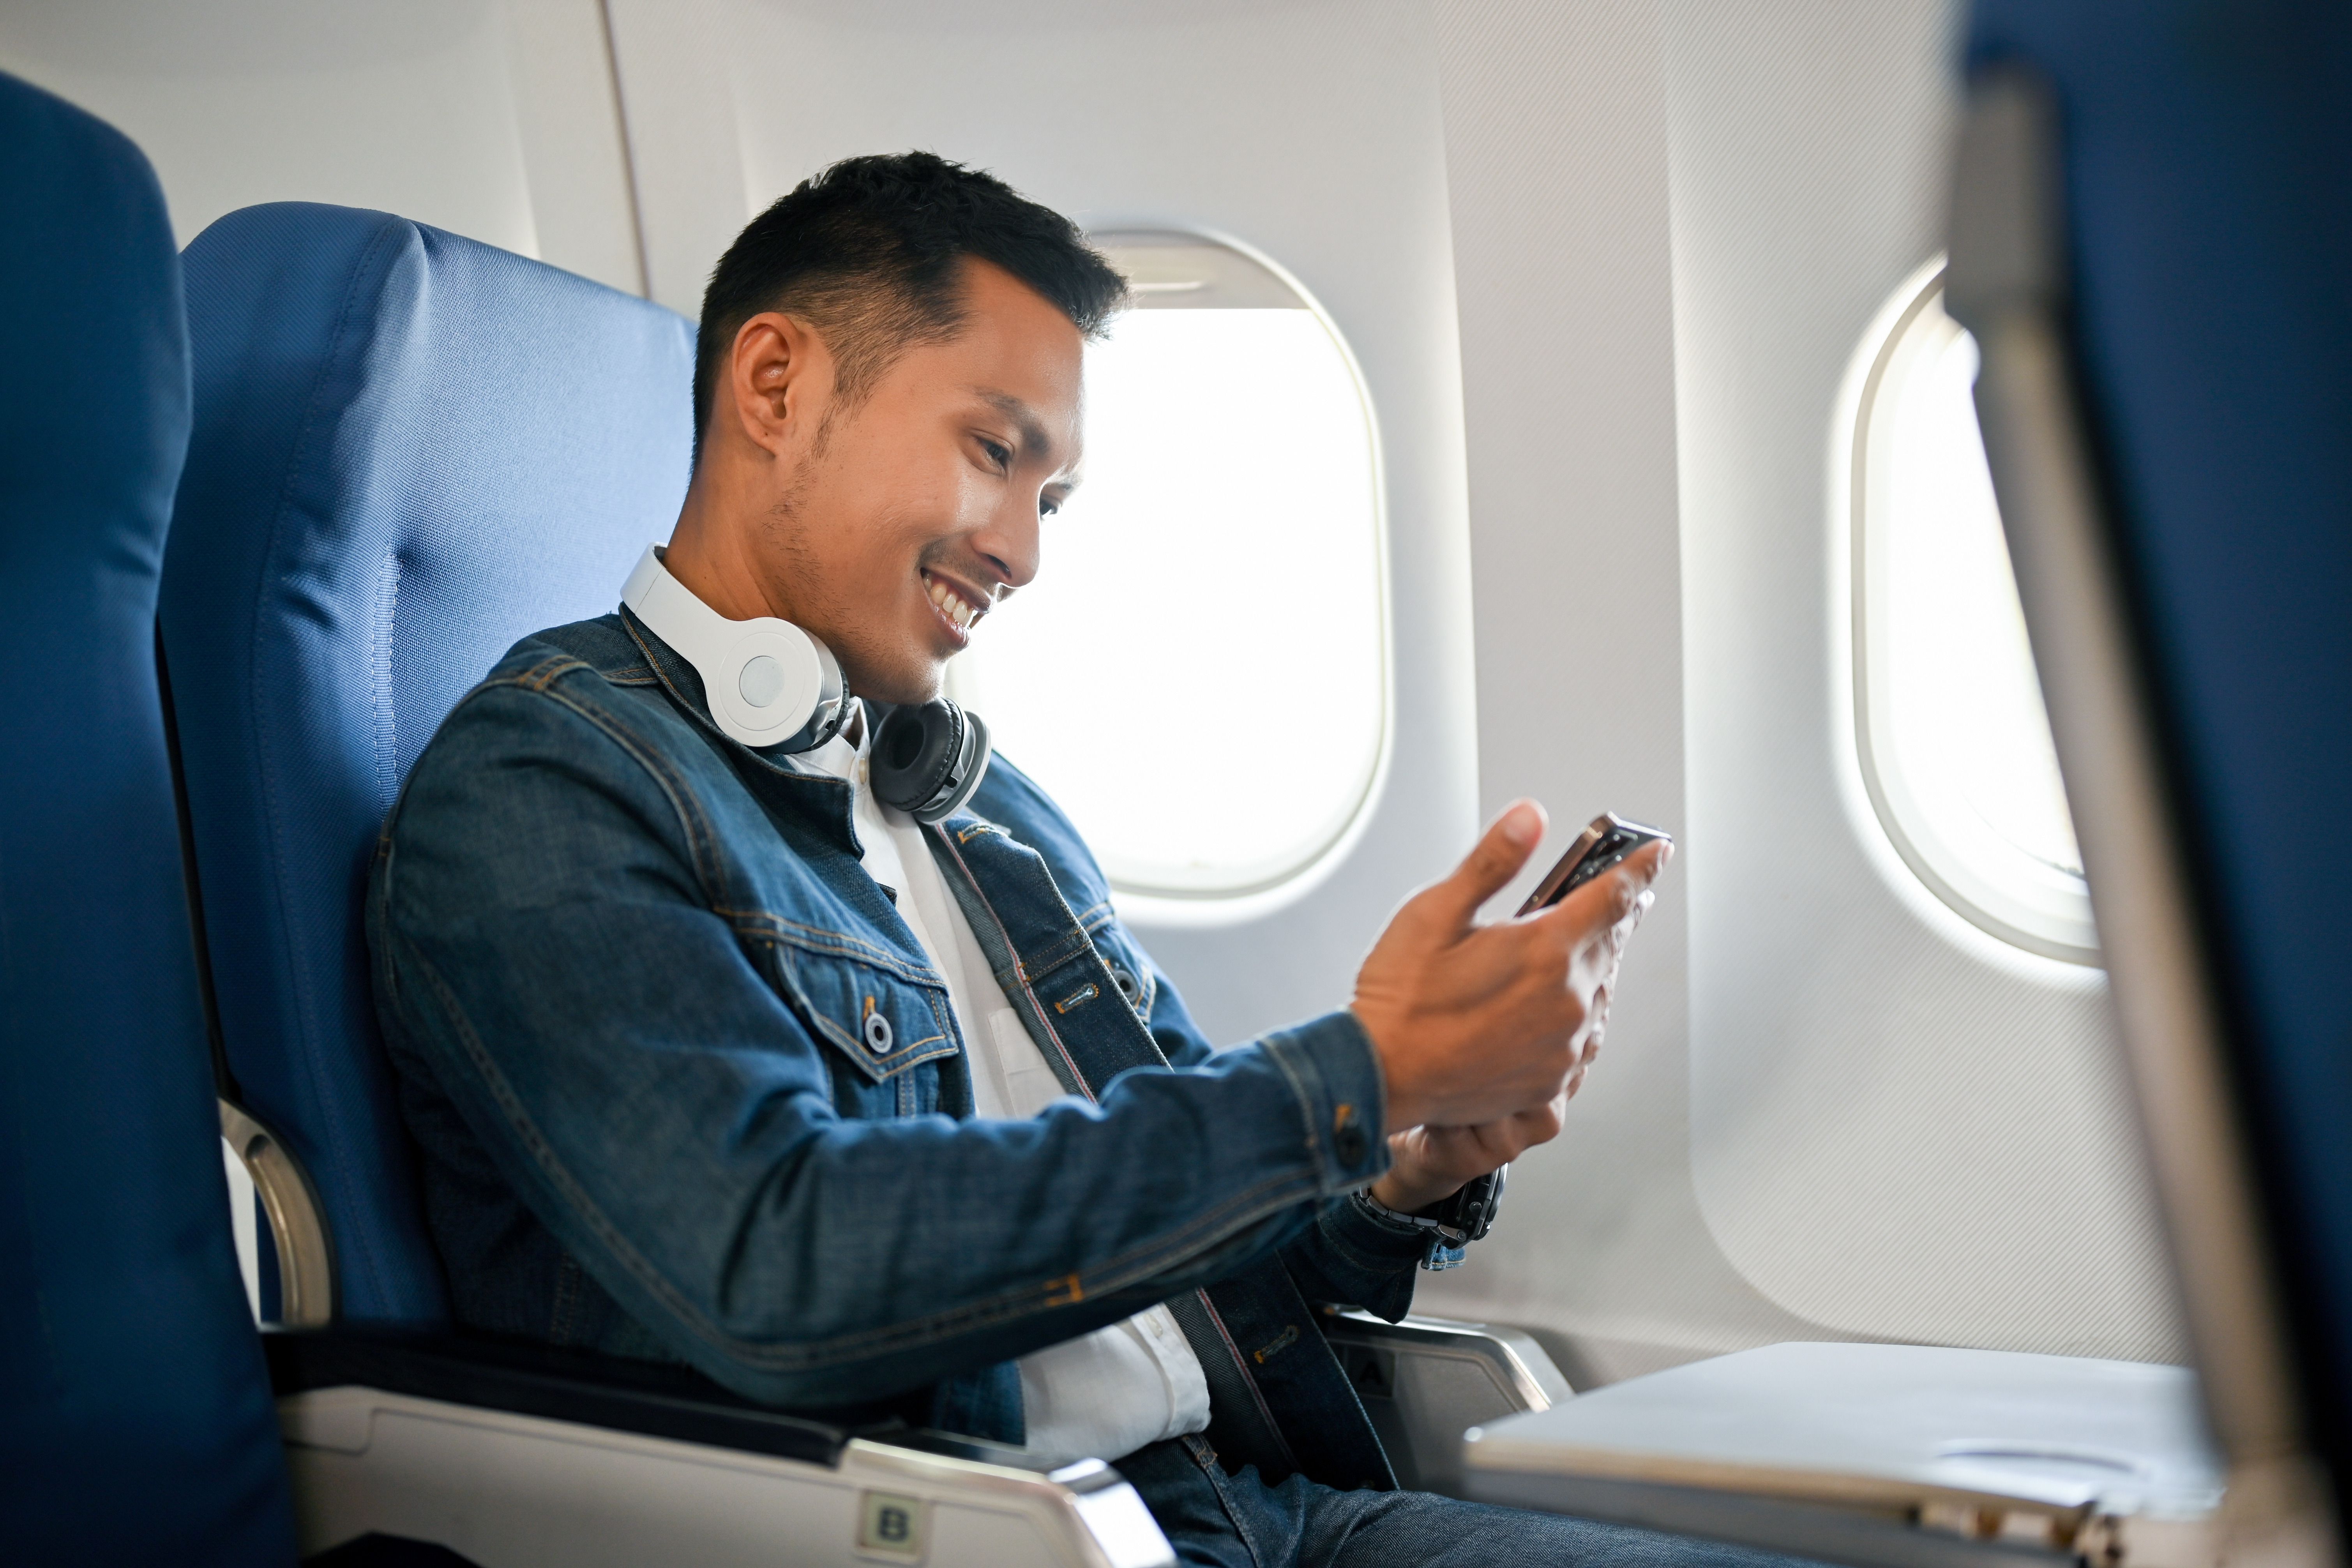 A man sitting in a window seat on an aircraft using his phone.